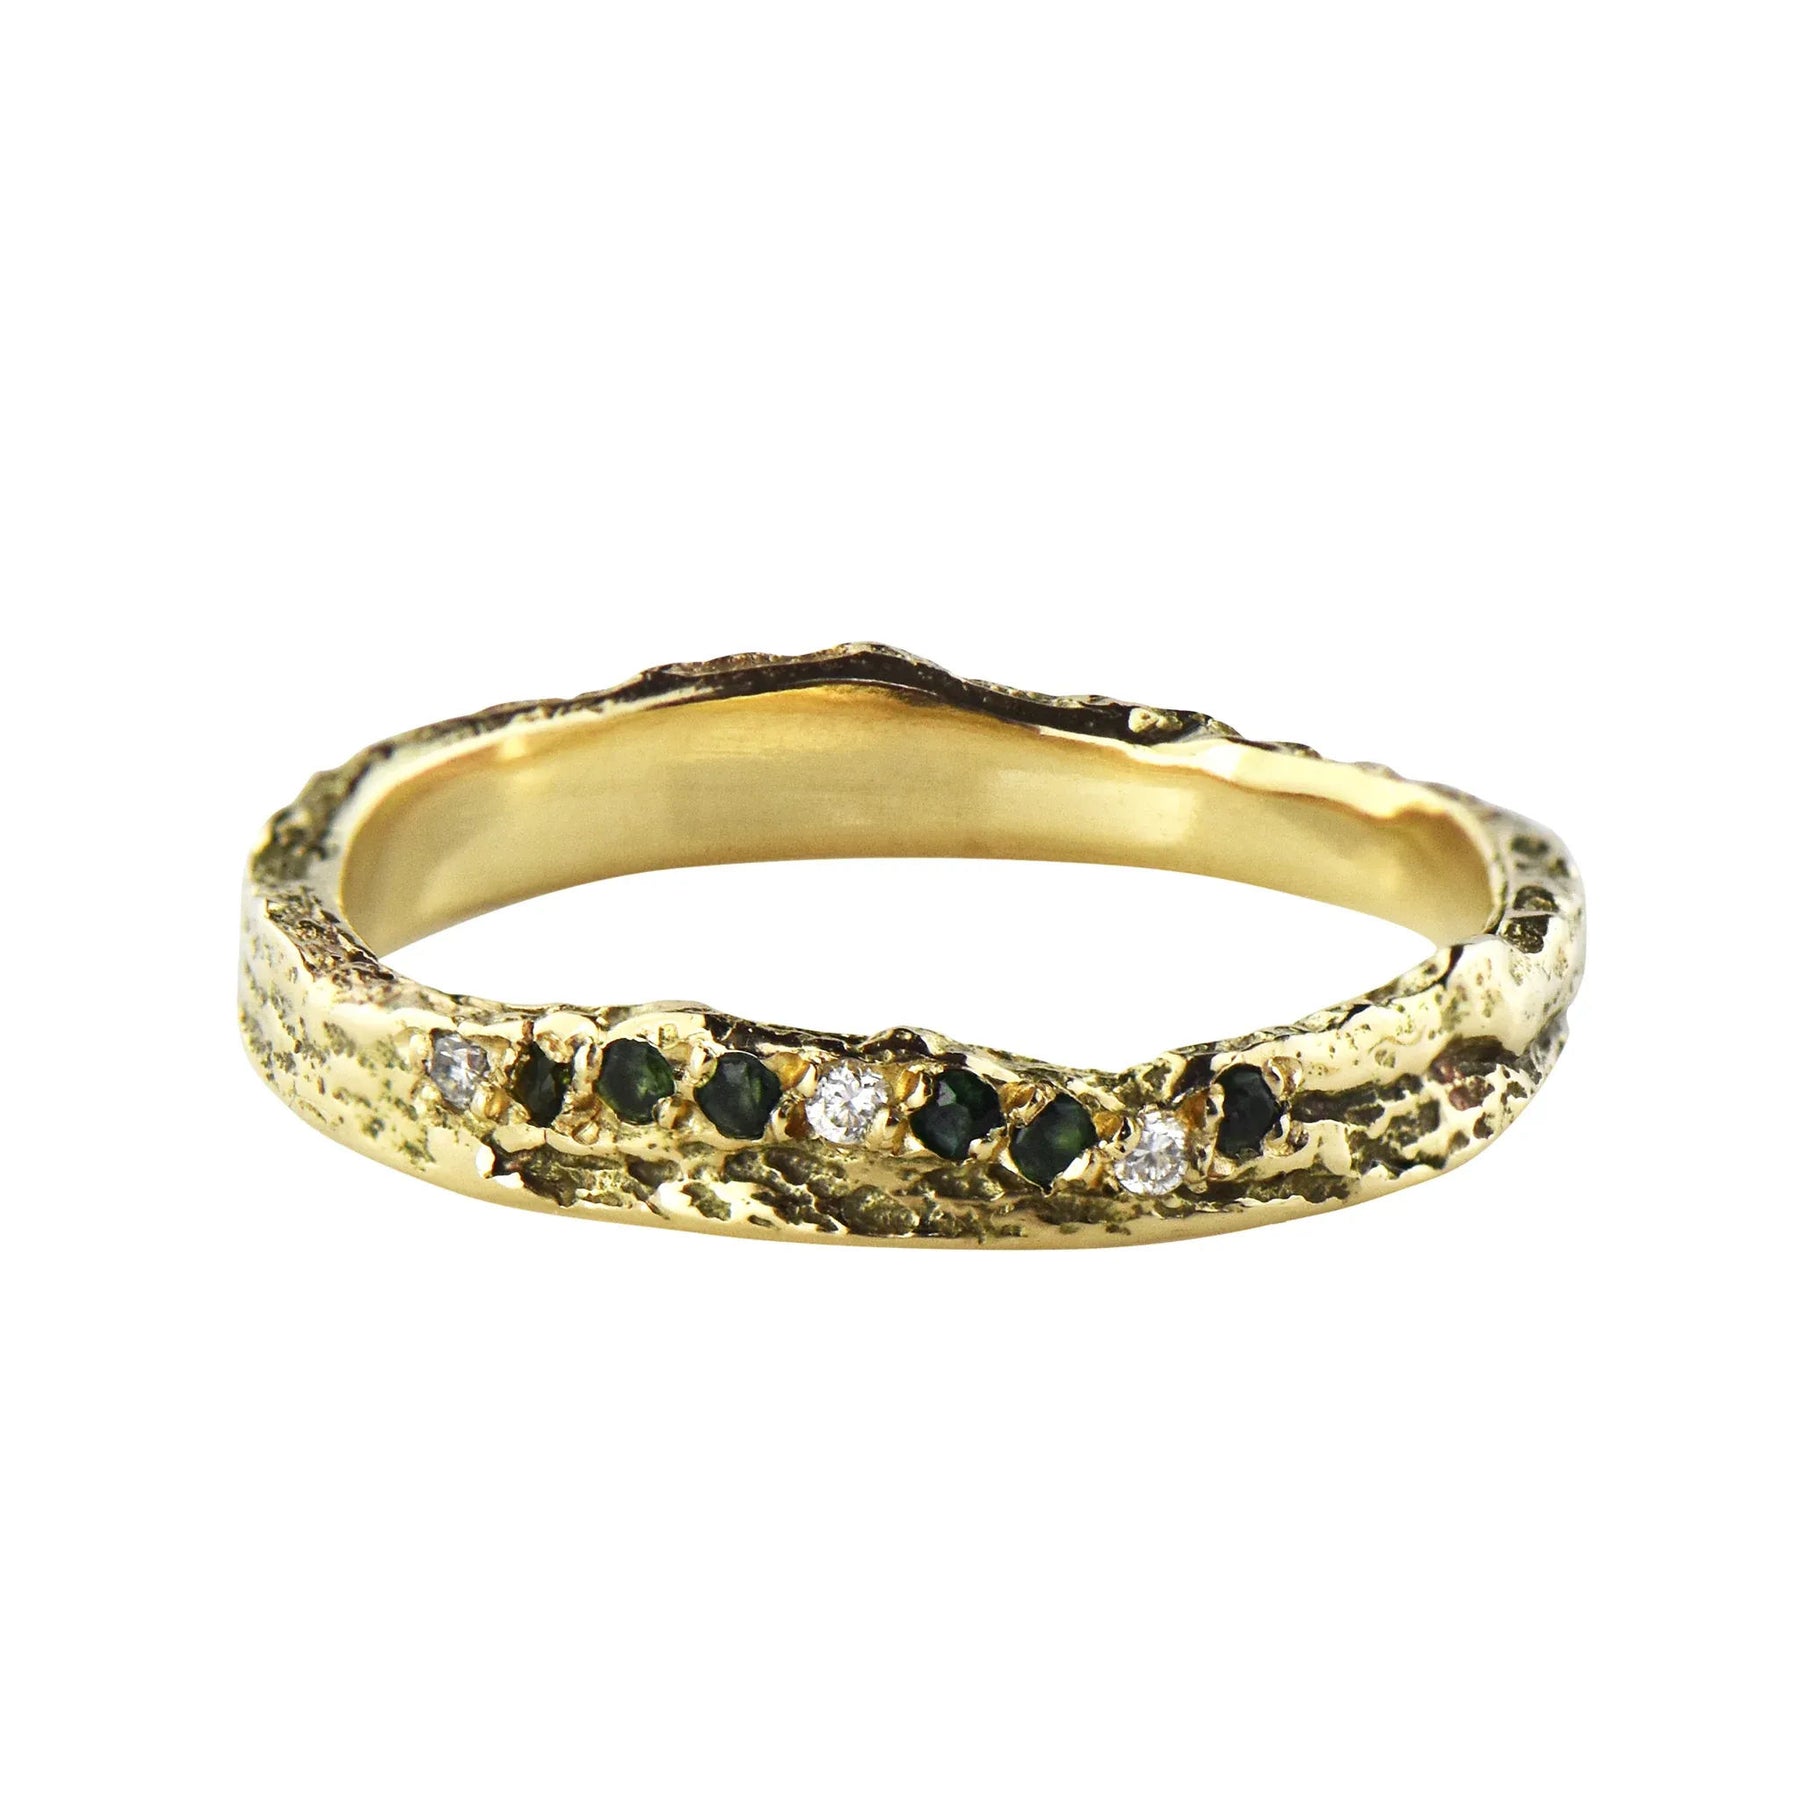 14ct Gold Skinny London Plane Ring with Diamonds and Tourmalines - Boutee